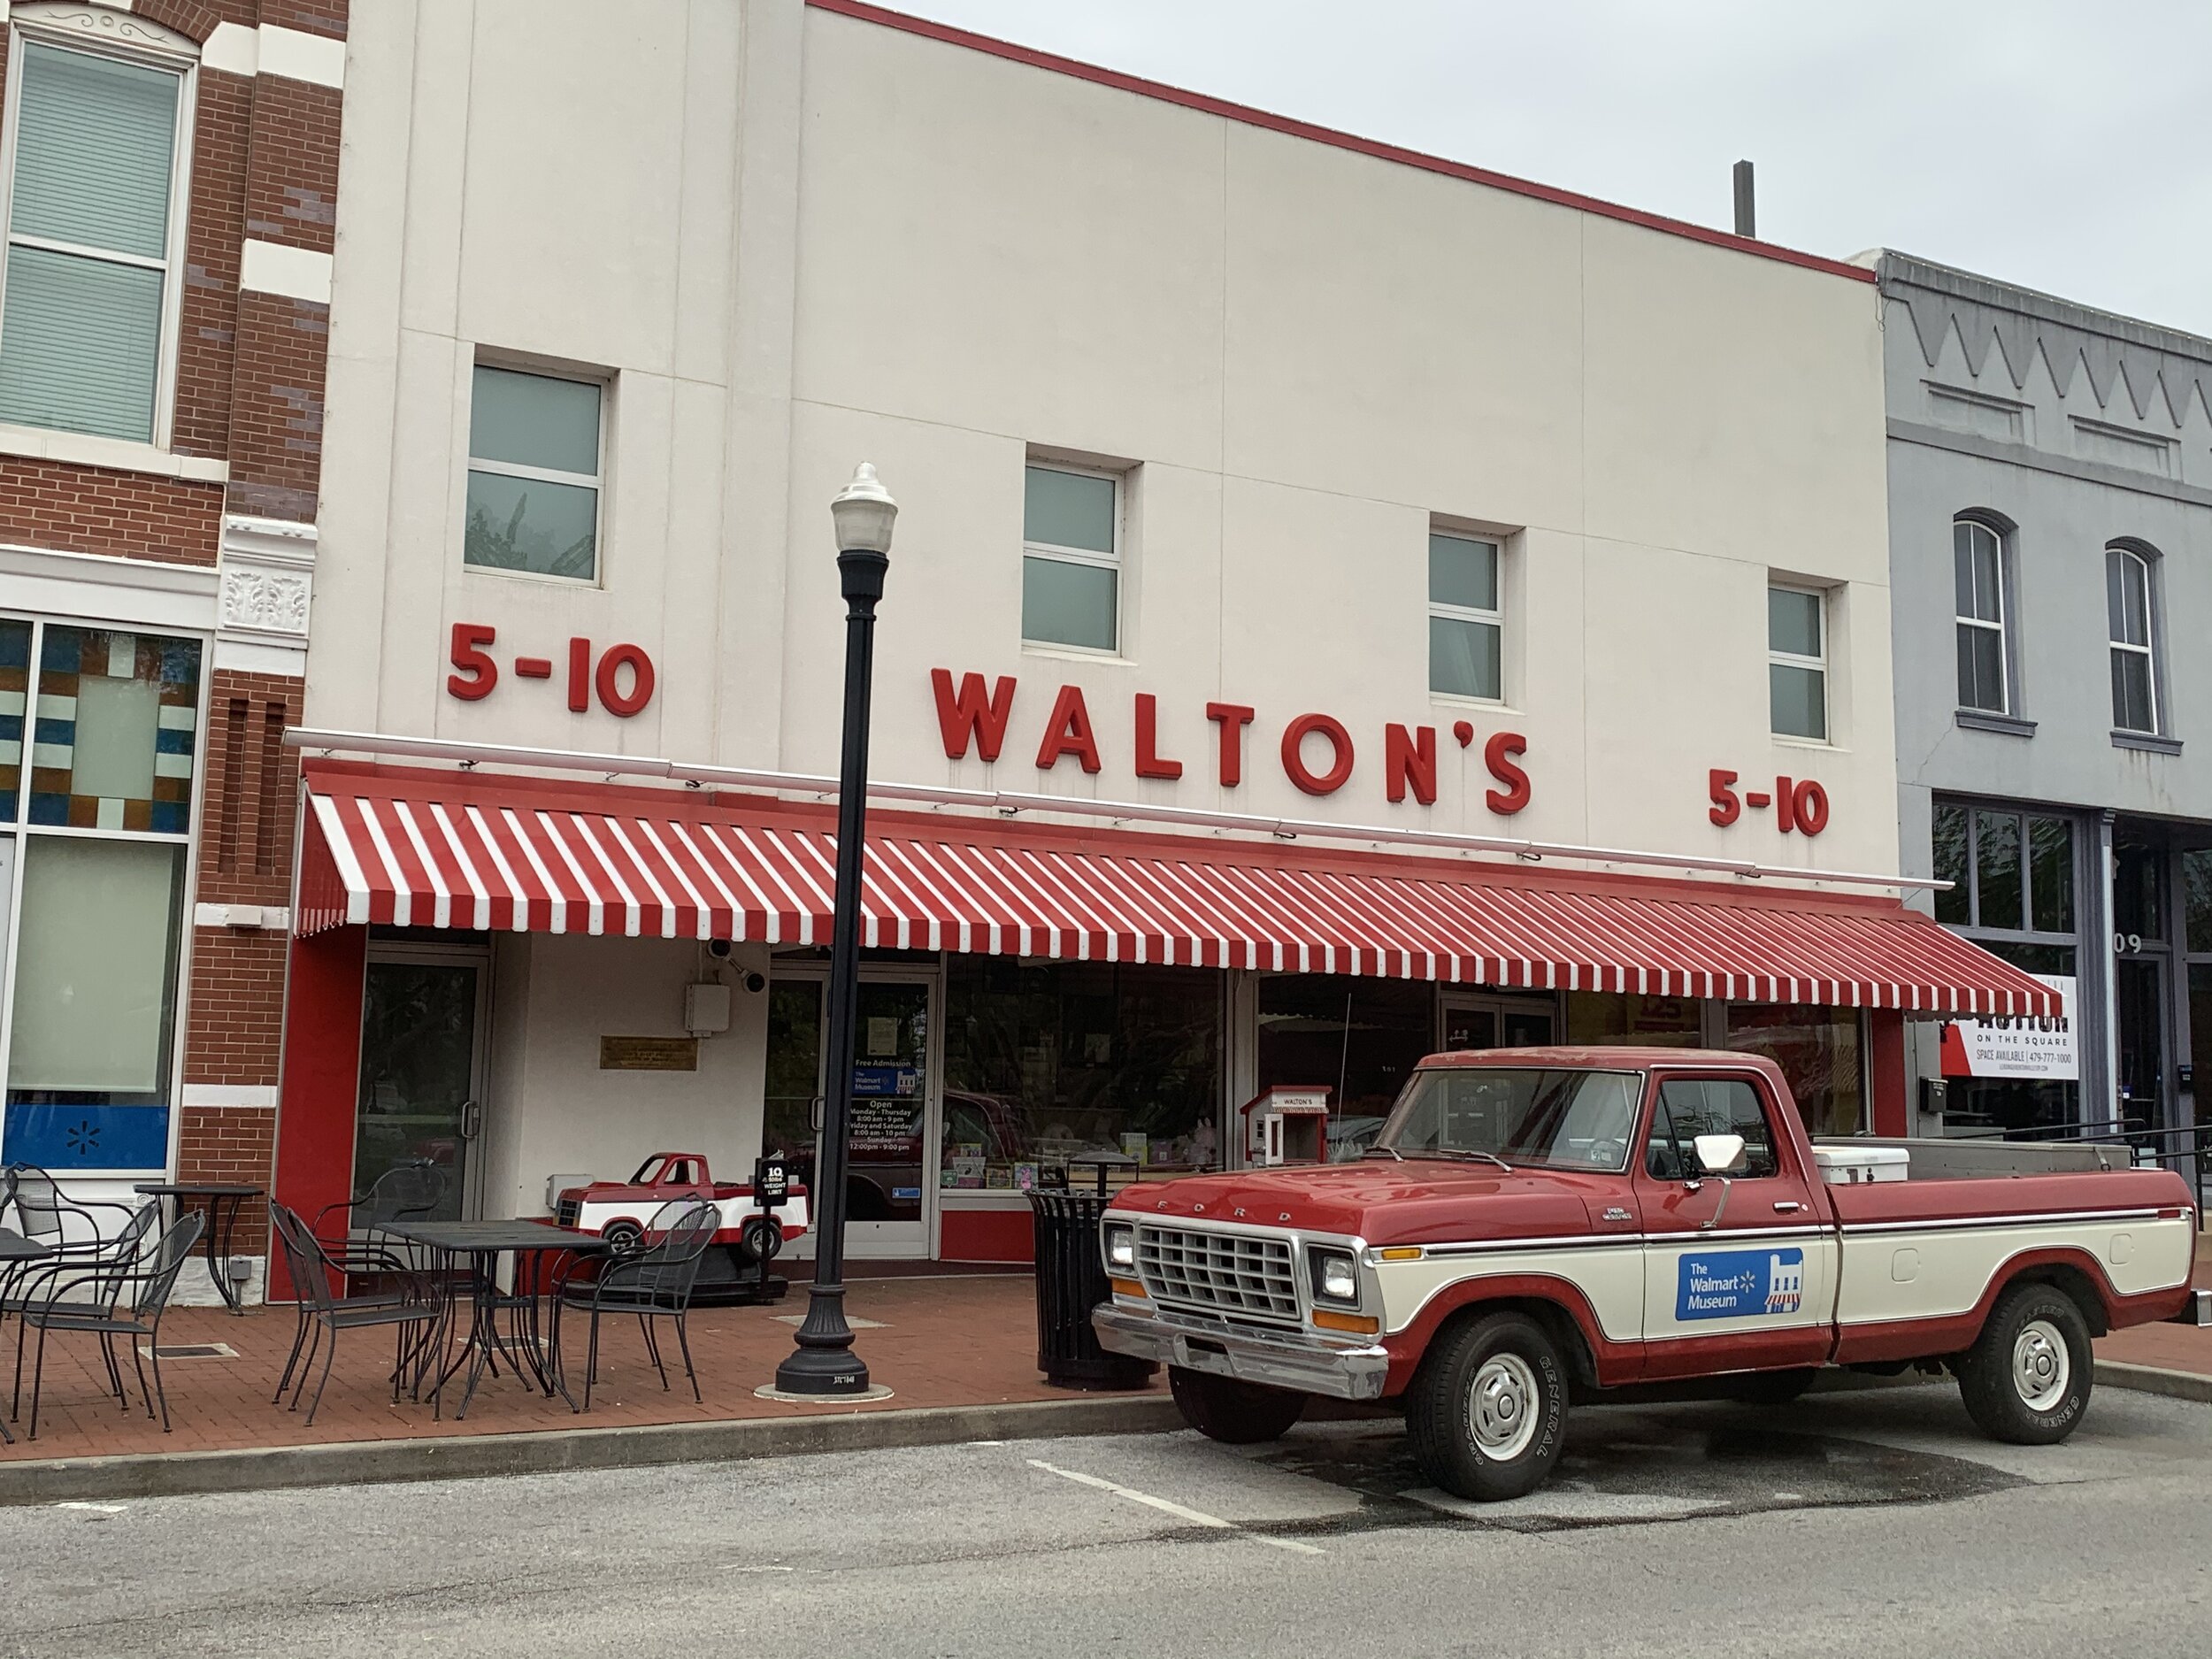  Keith and Tiffany also took us by The Walmart Museum in Bentonville, Arkansas. This museum is a replica of the very beginning of what we know as Walmart today. The truck outside  was actually Sam Walton’s transportation back in the day. Walmart’s ho